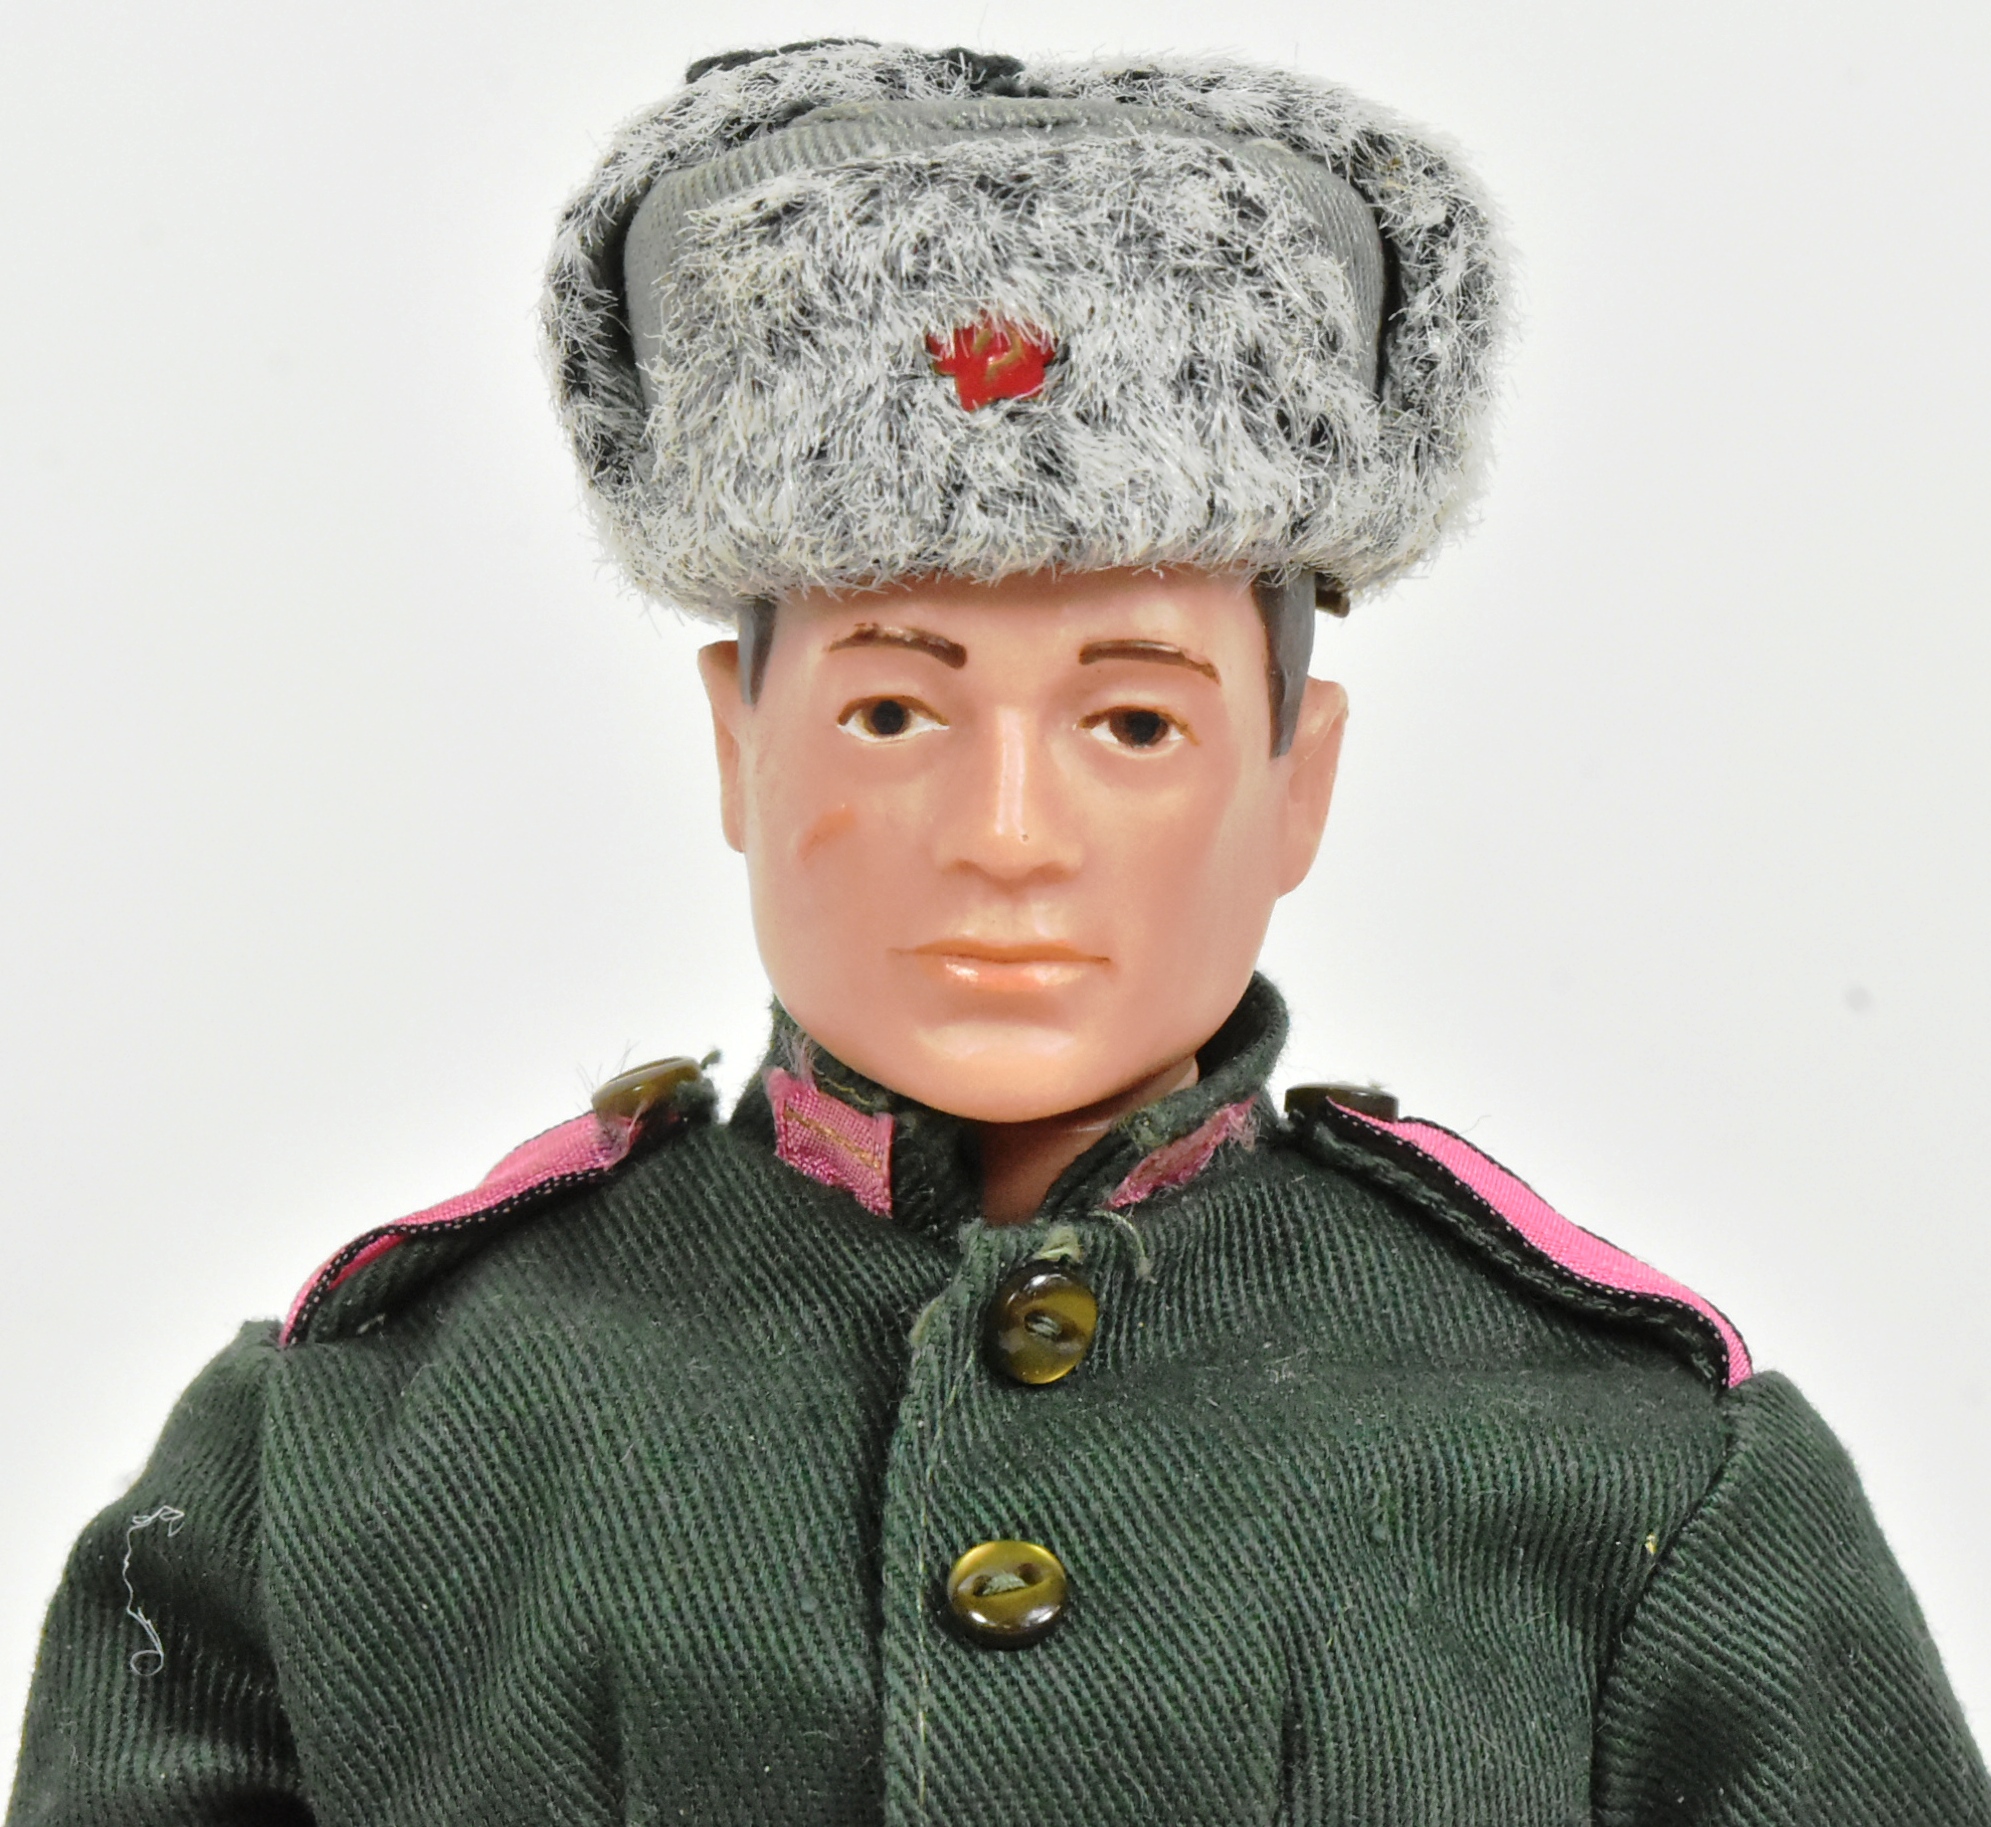 ACTION MAN - PALITOY - VINTAGE RUSSIAN INFANTRYMAN DOLL / FIGURE - Image 3 of 5